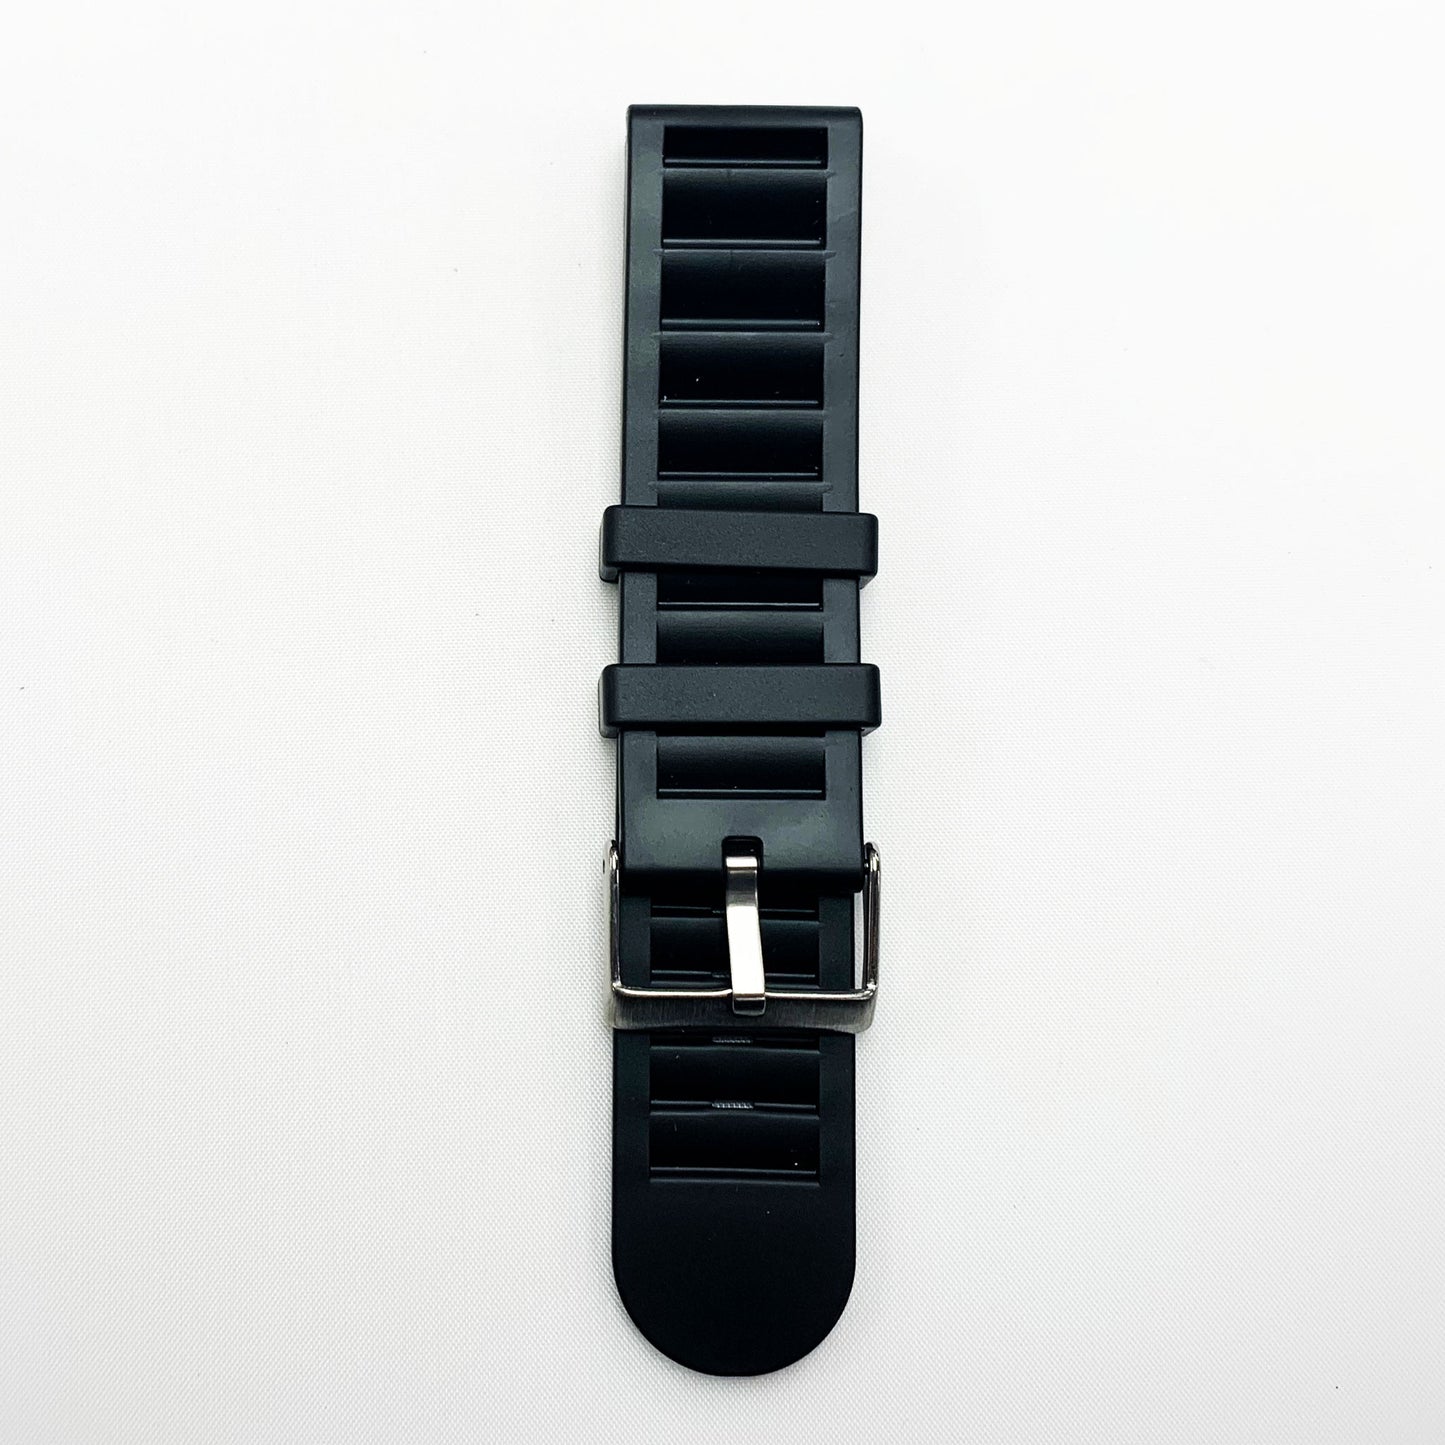 22 mm pvc step style watch band black color quick release regular size watch strap 1